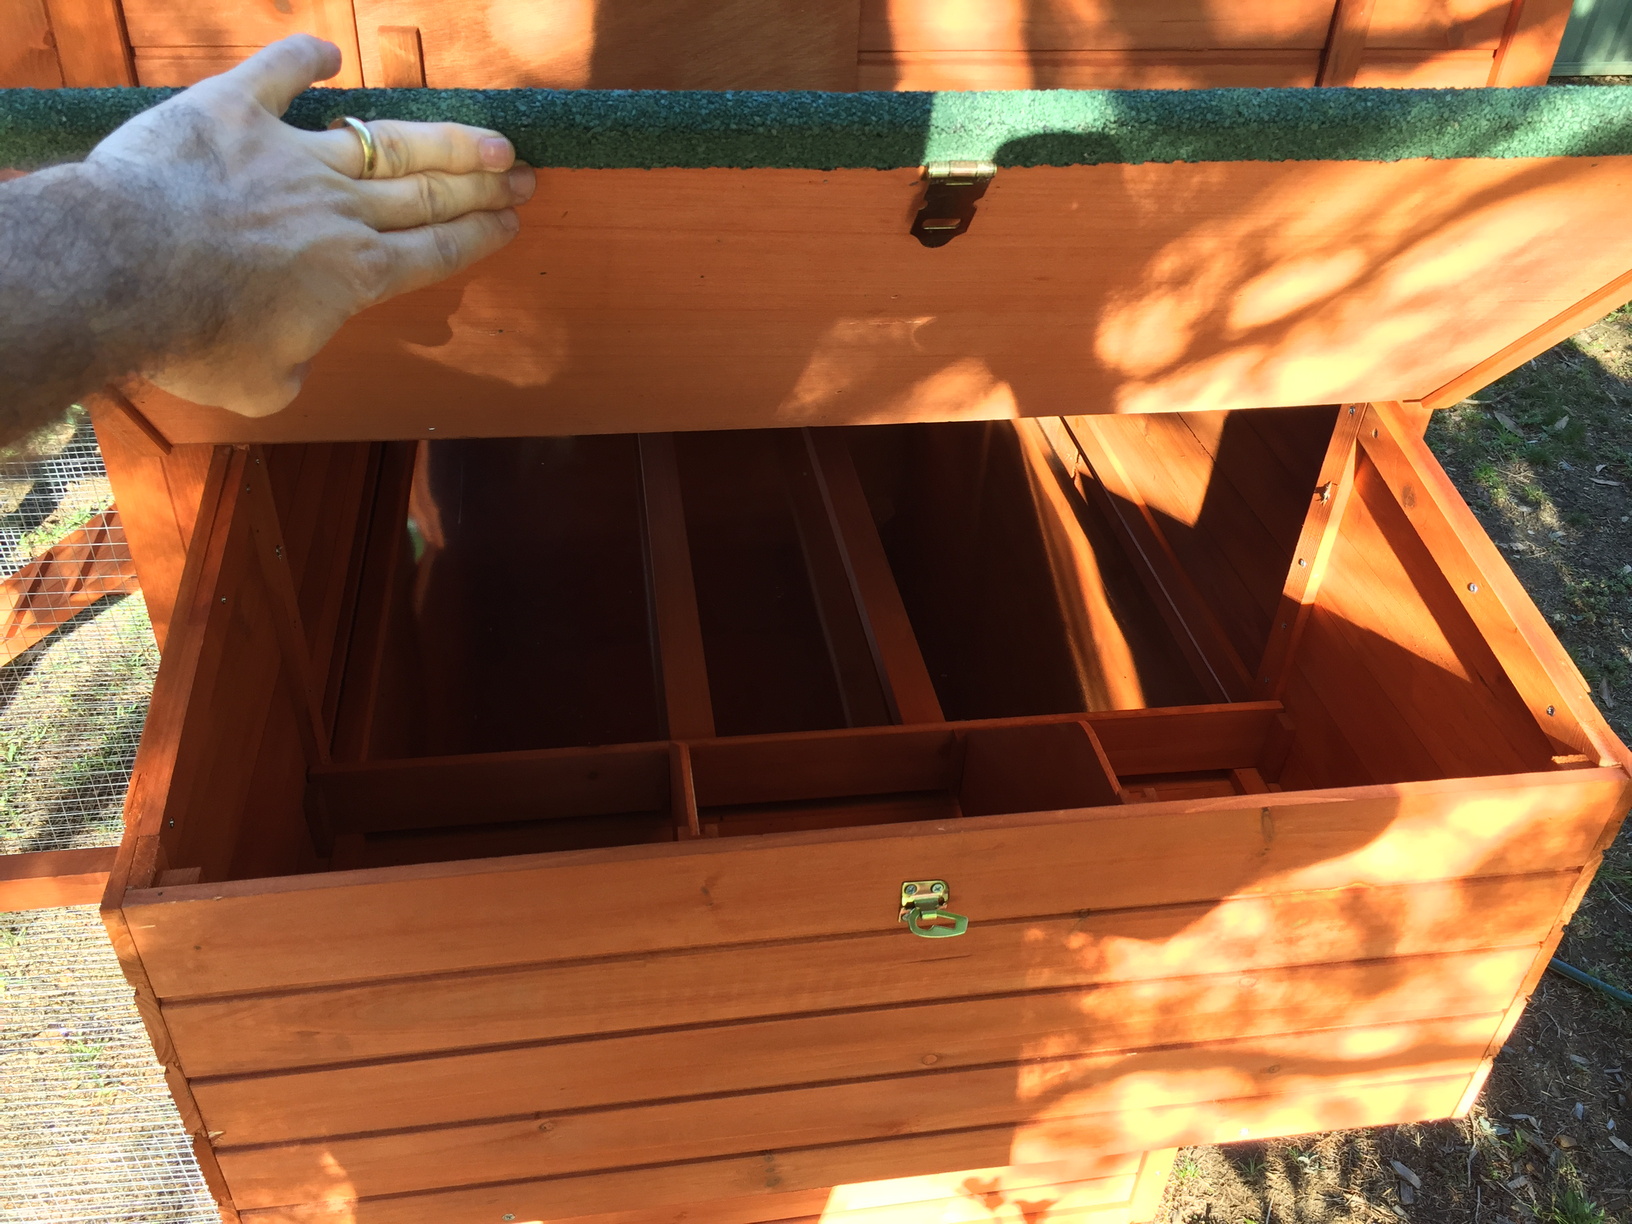 Nesting boxes with egg-collection hatch. The nesting boxes are now filled with a thick layer of wood shavings.